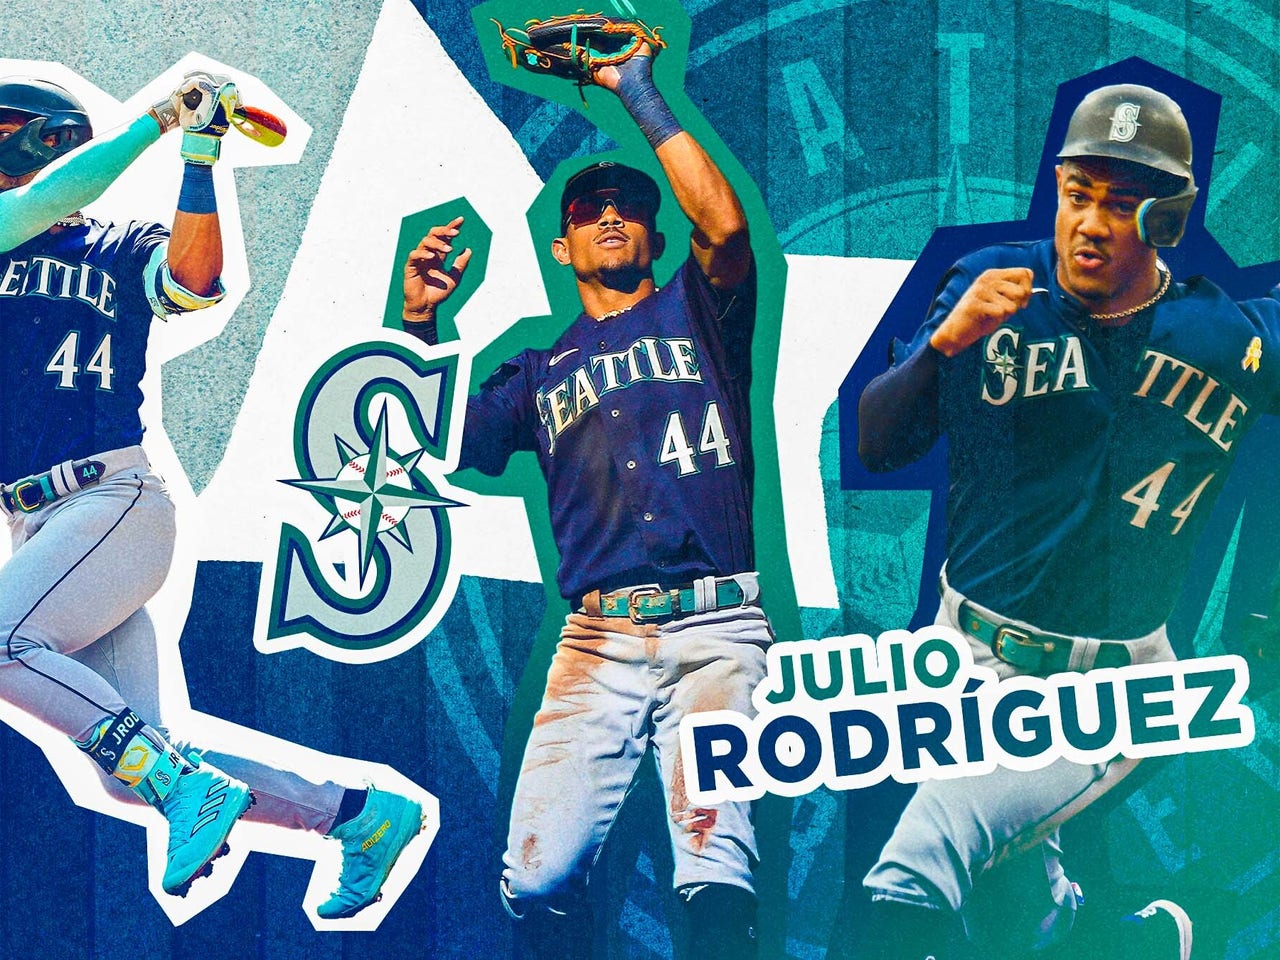 Julio Rodríguez making strong case for All-Star selection